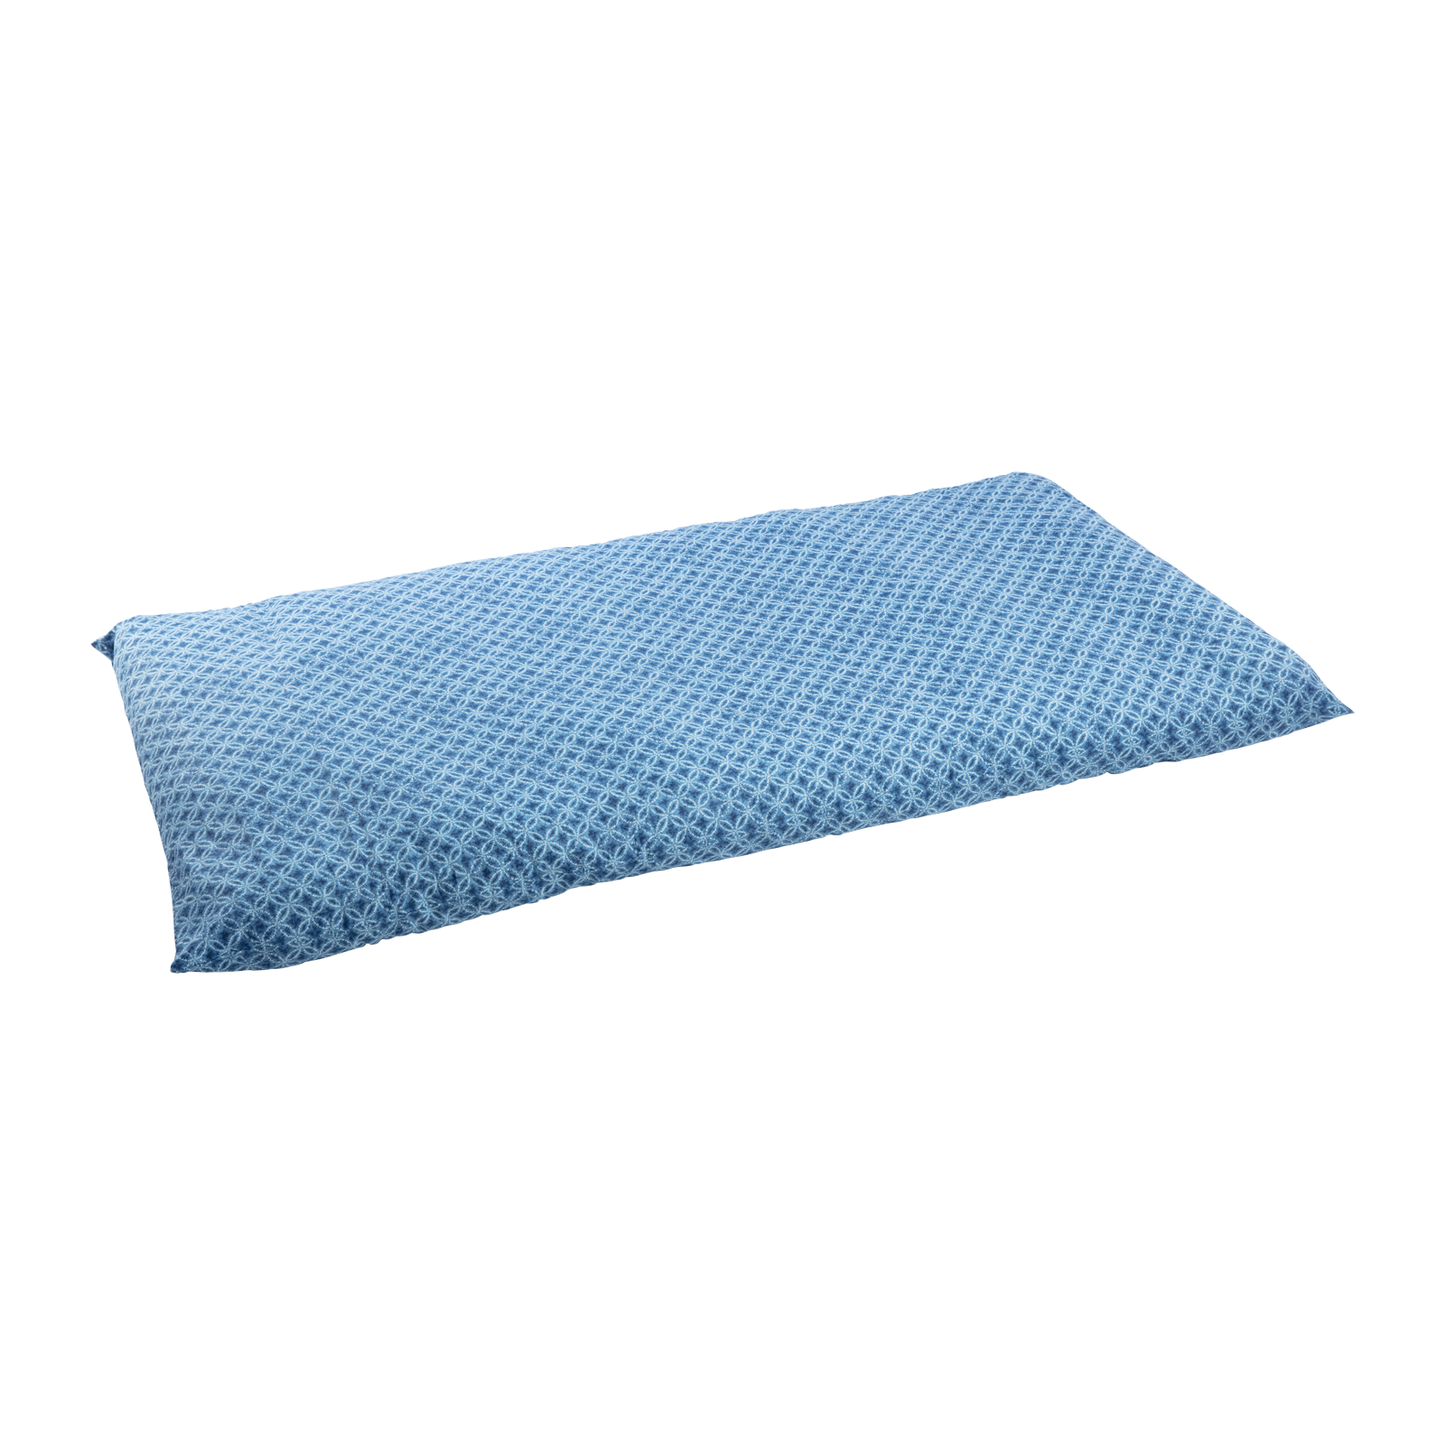 Shiki Futon Taidai Blue Removable COVER ONLY